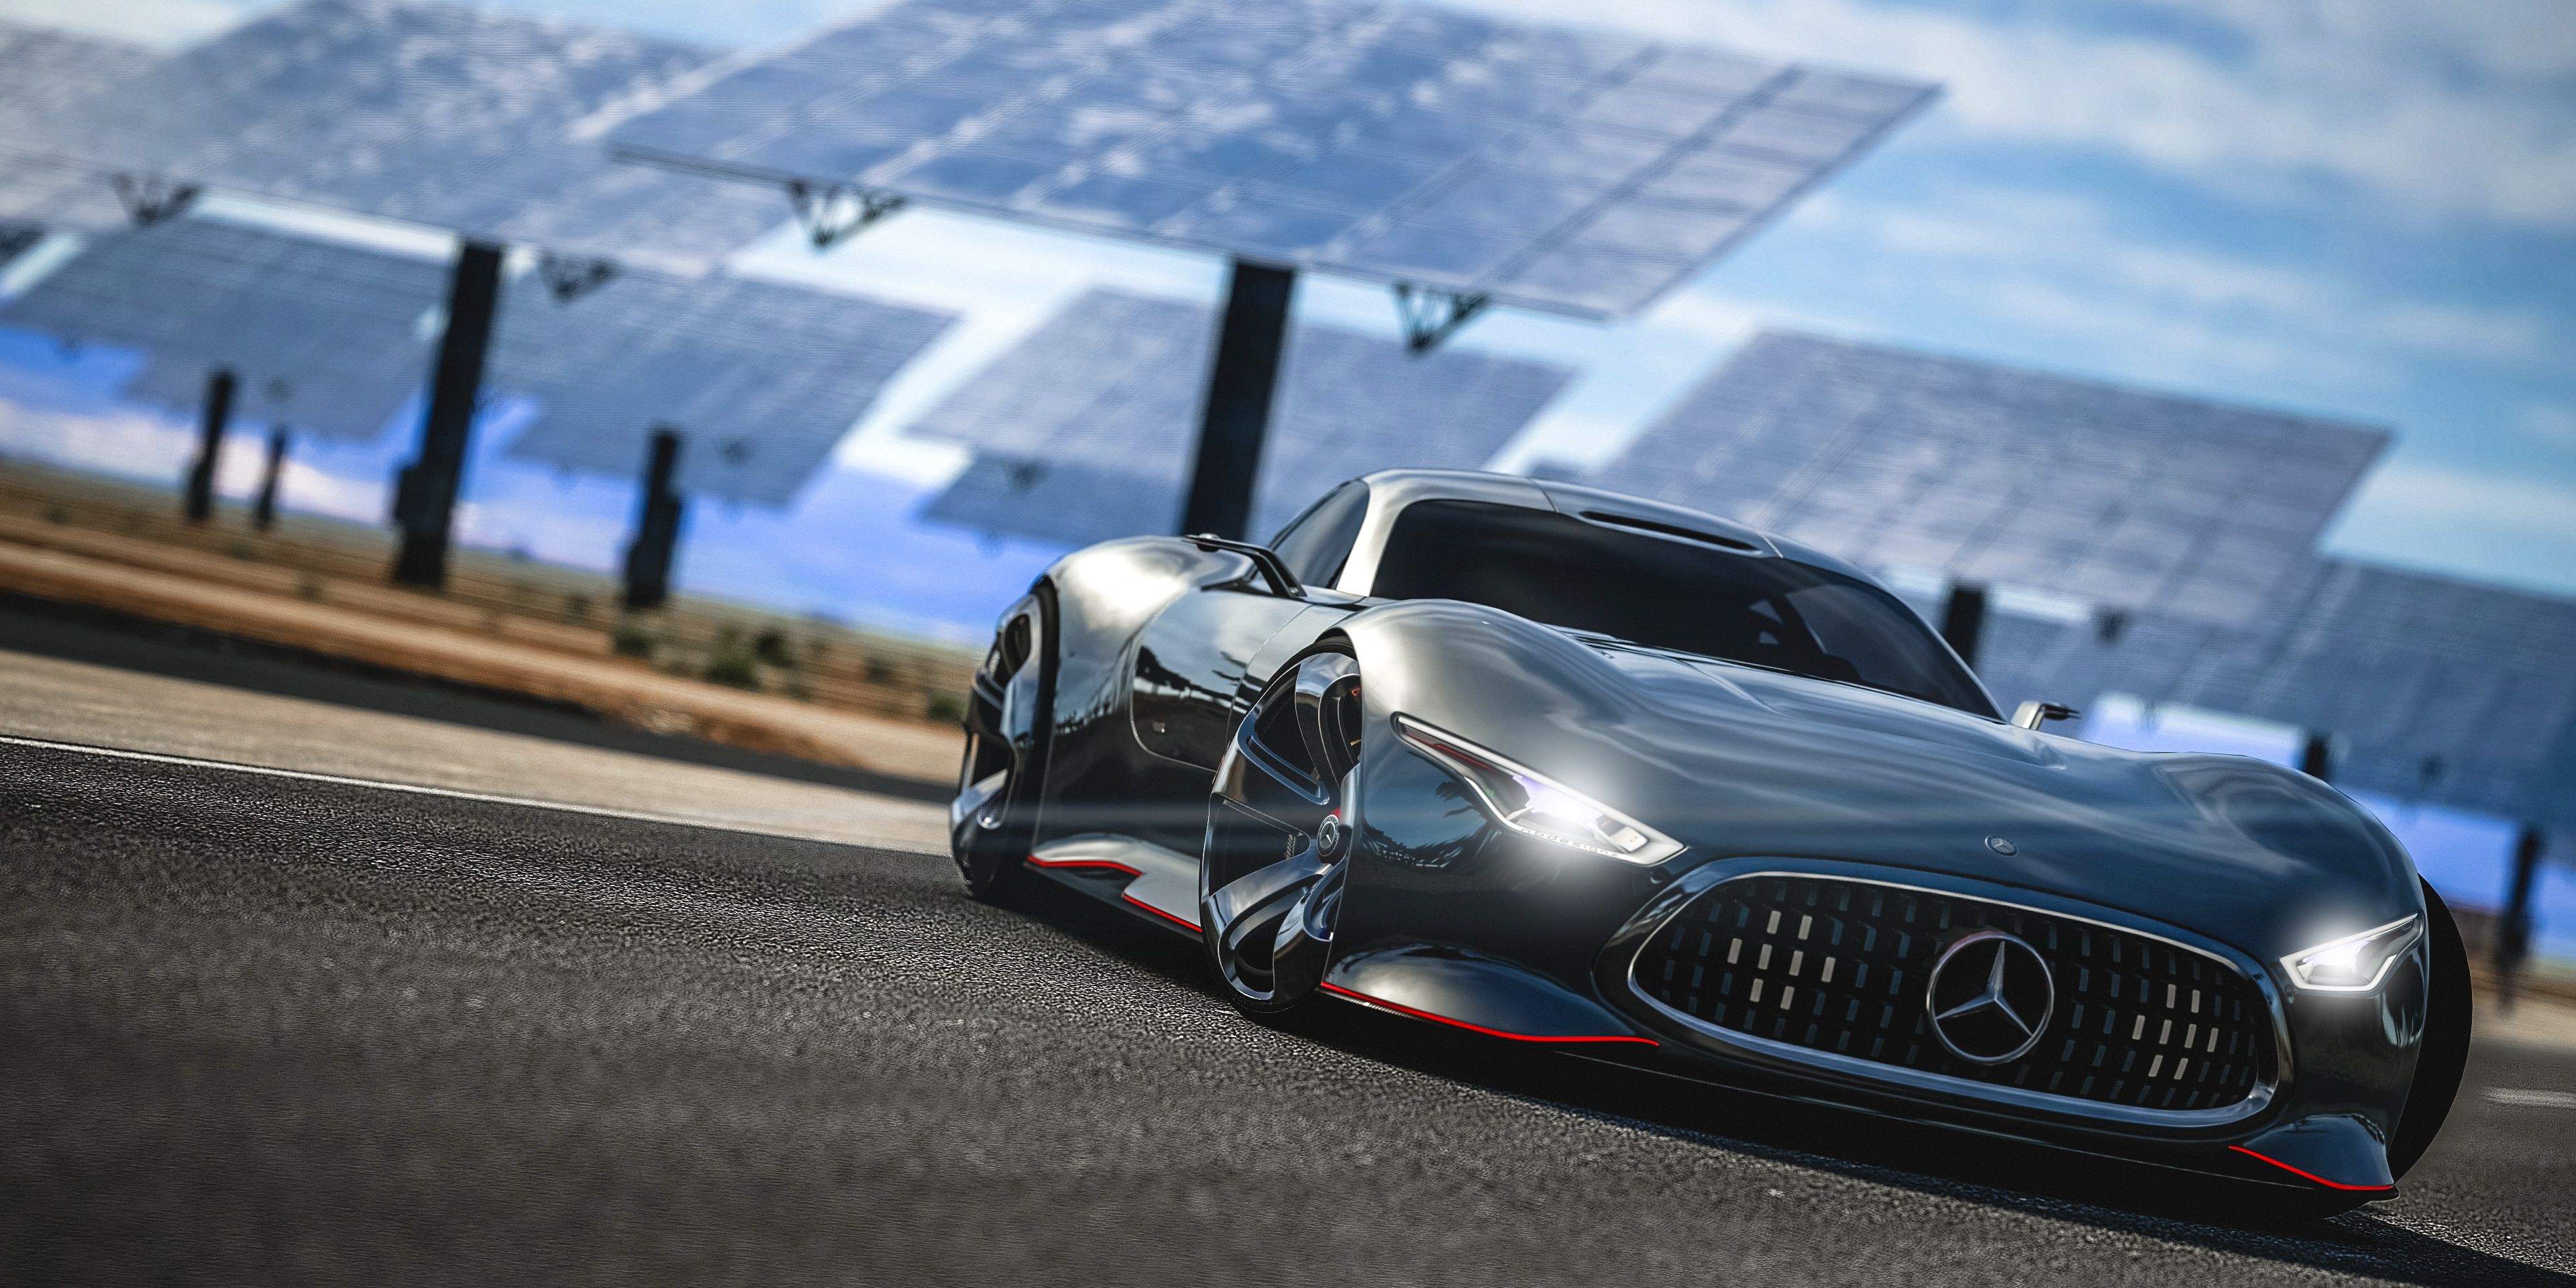 image from Gran Turismo 7 featuring a silver Mercedes car with solar panels in the background